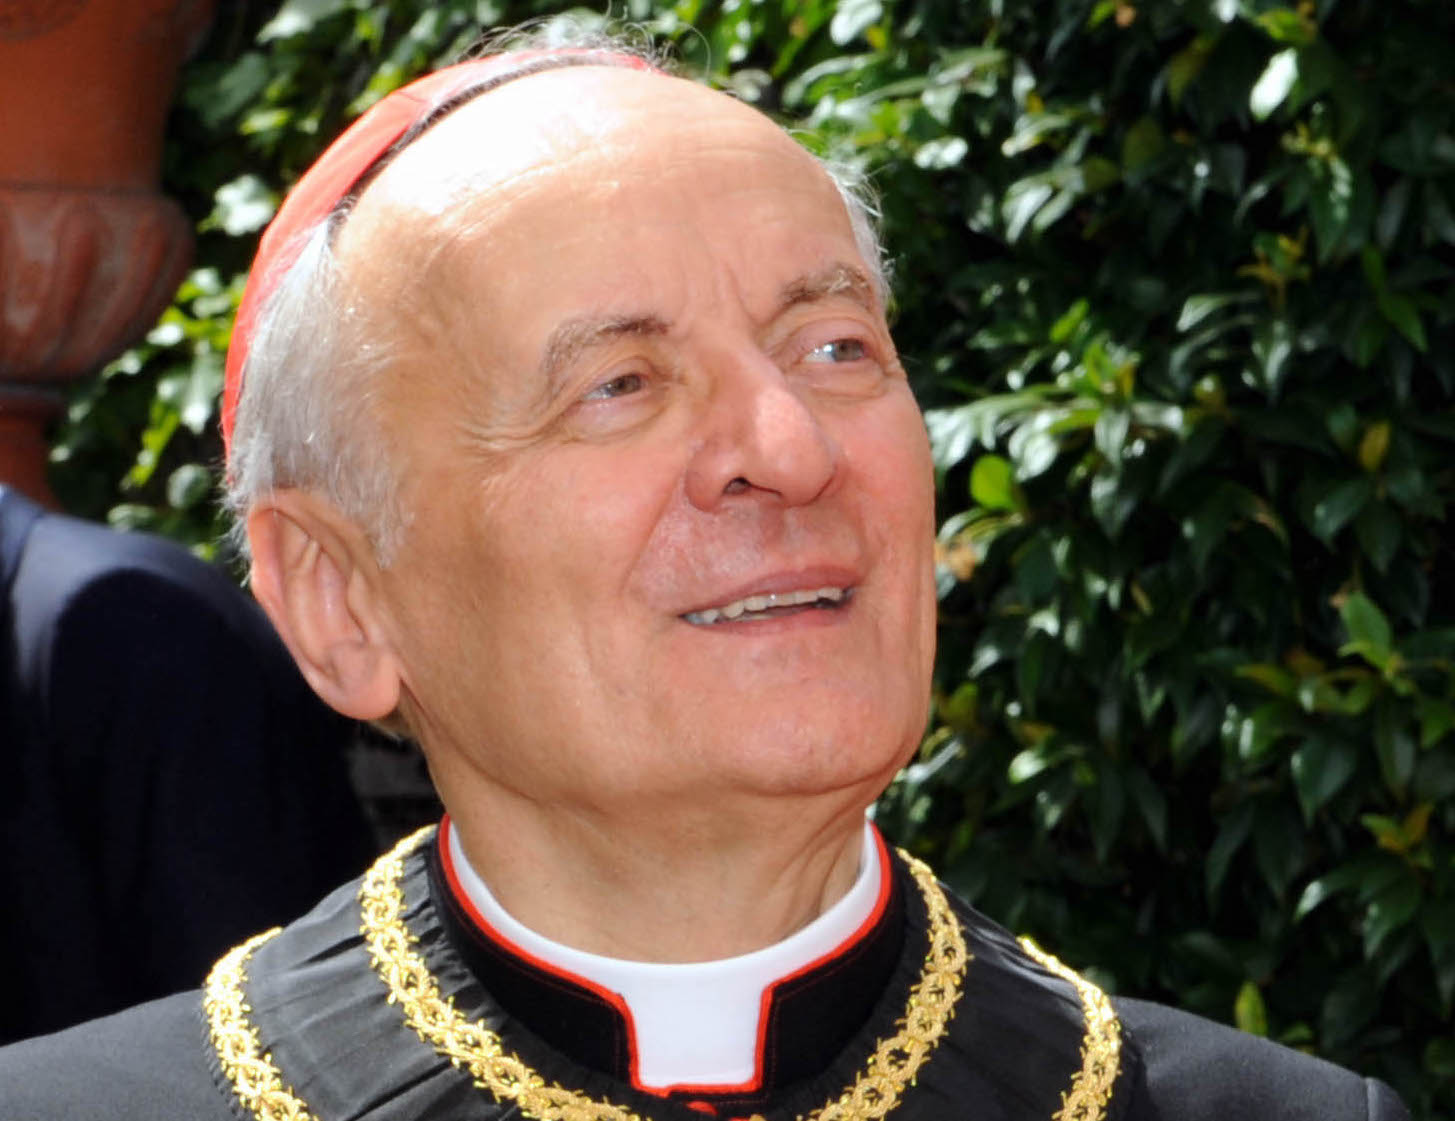 The Order of Malta mourns the passing of Cardinal Paolo Sardi